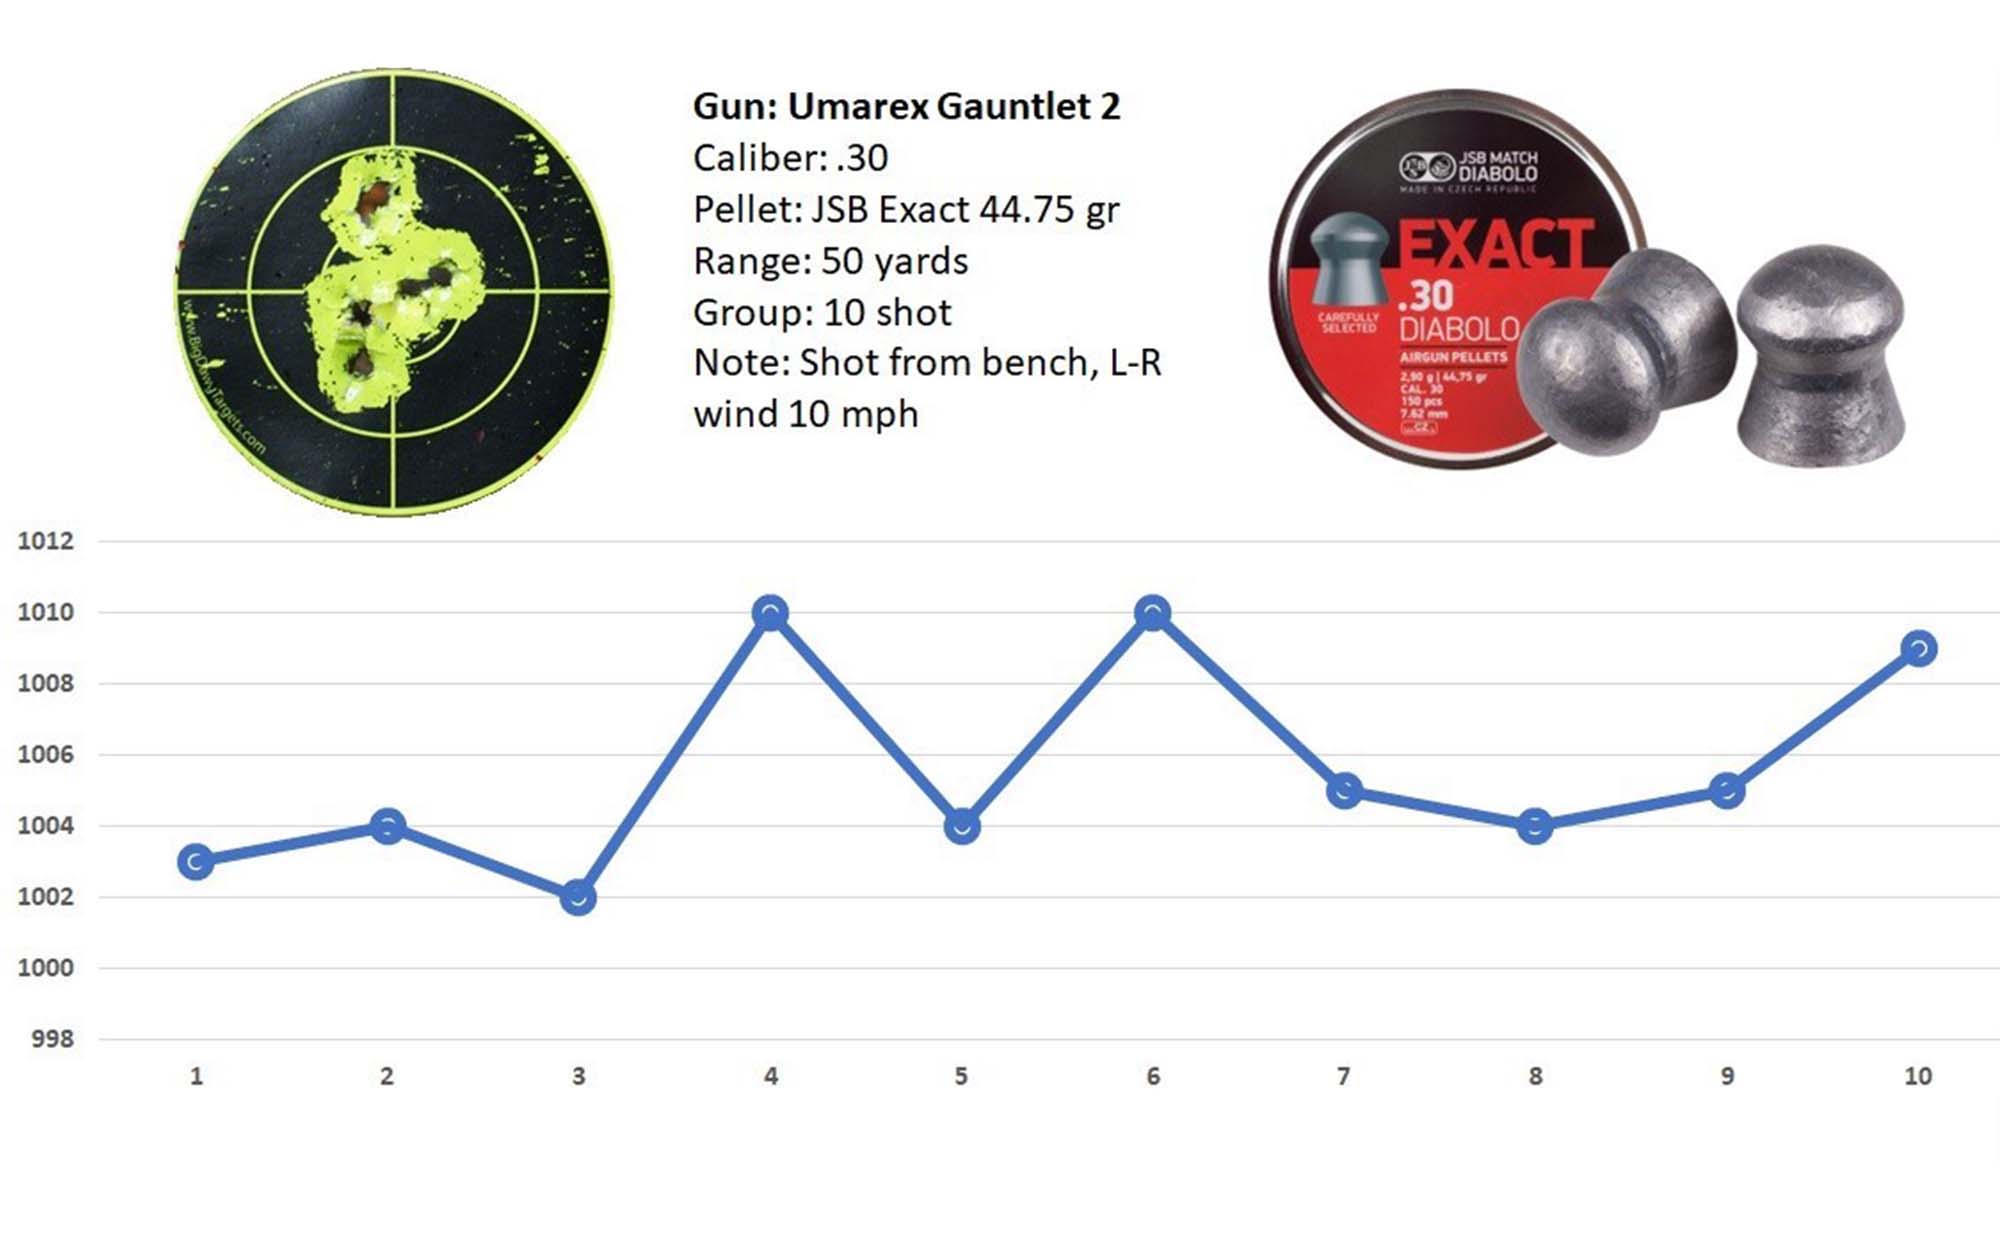 The Umarex Gauntlet 2's variance is charted.